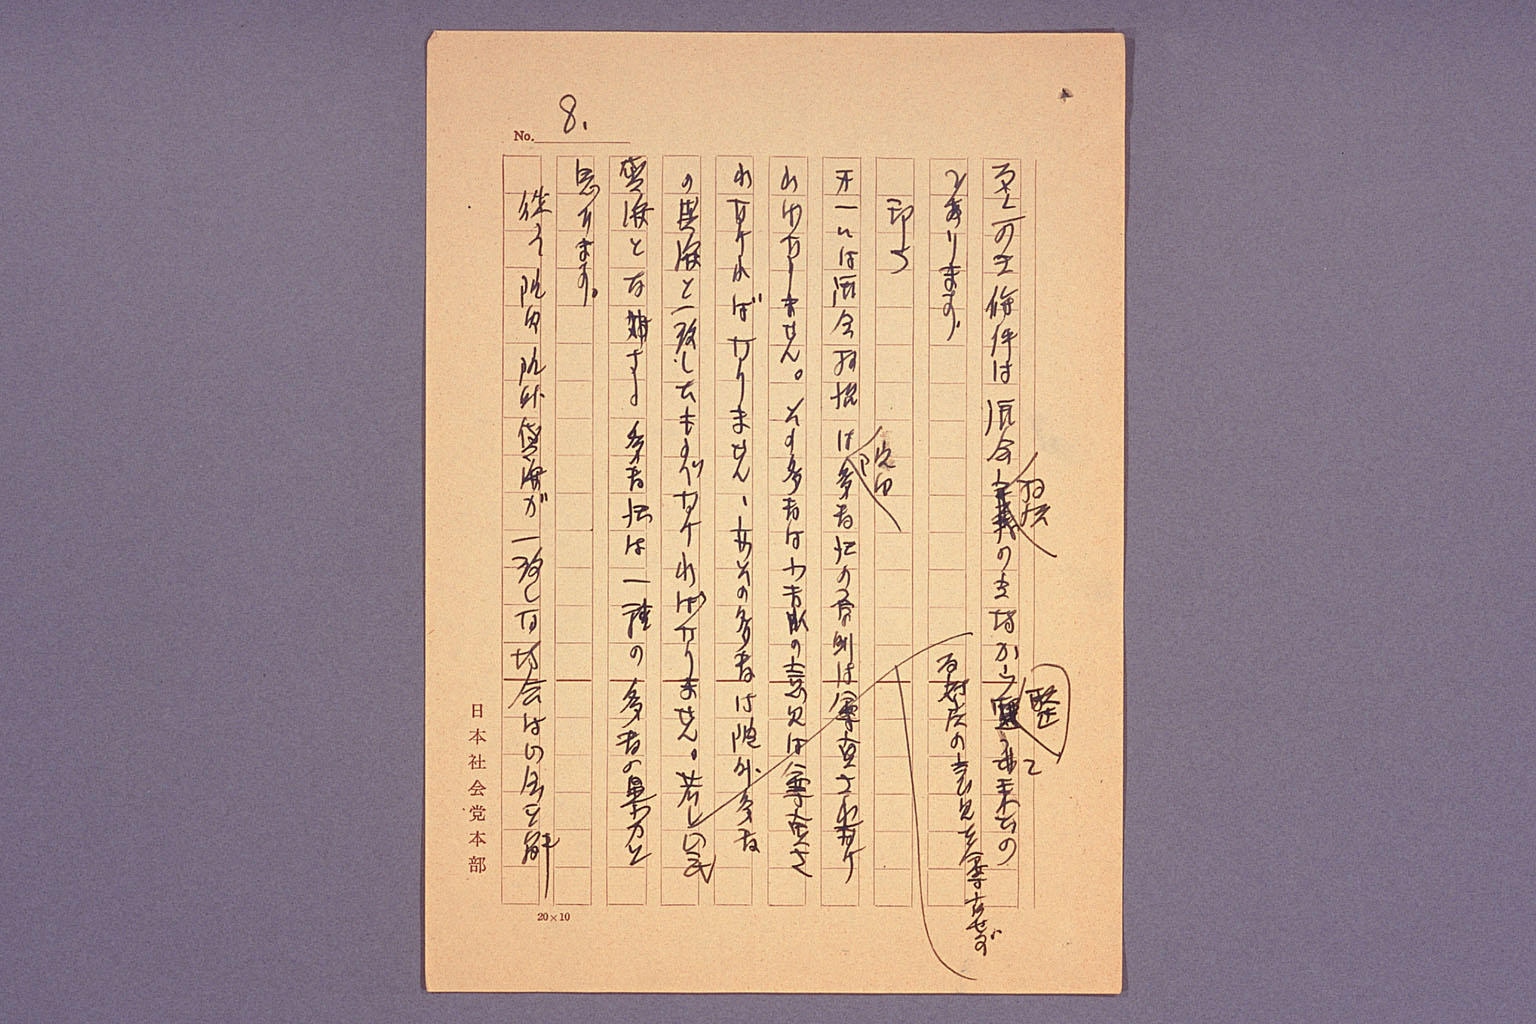 Speech autograph in which dissolution of the Diet was demanded (larger)